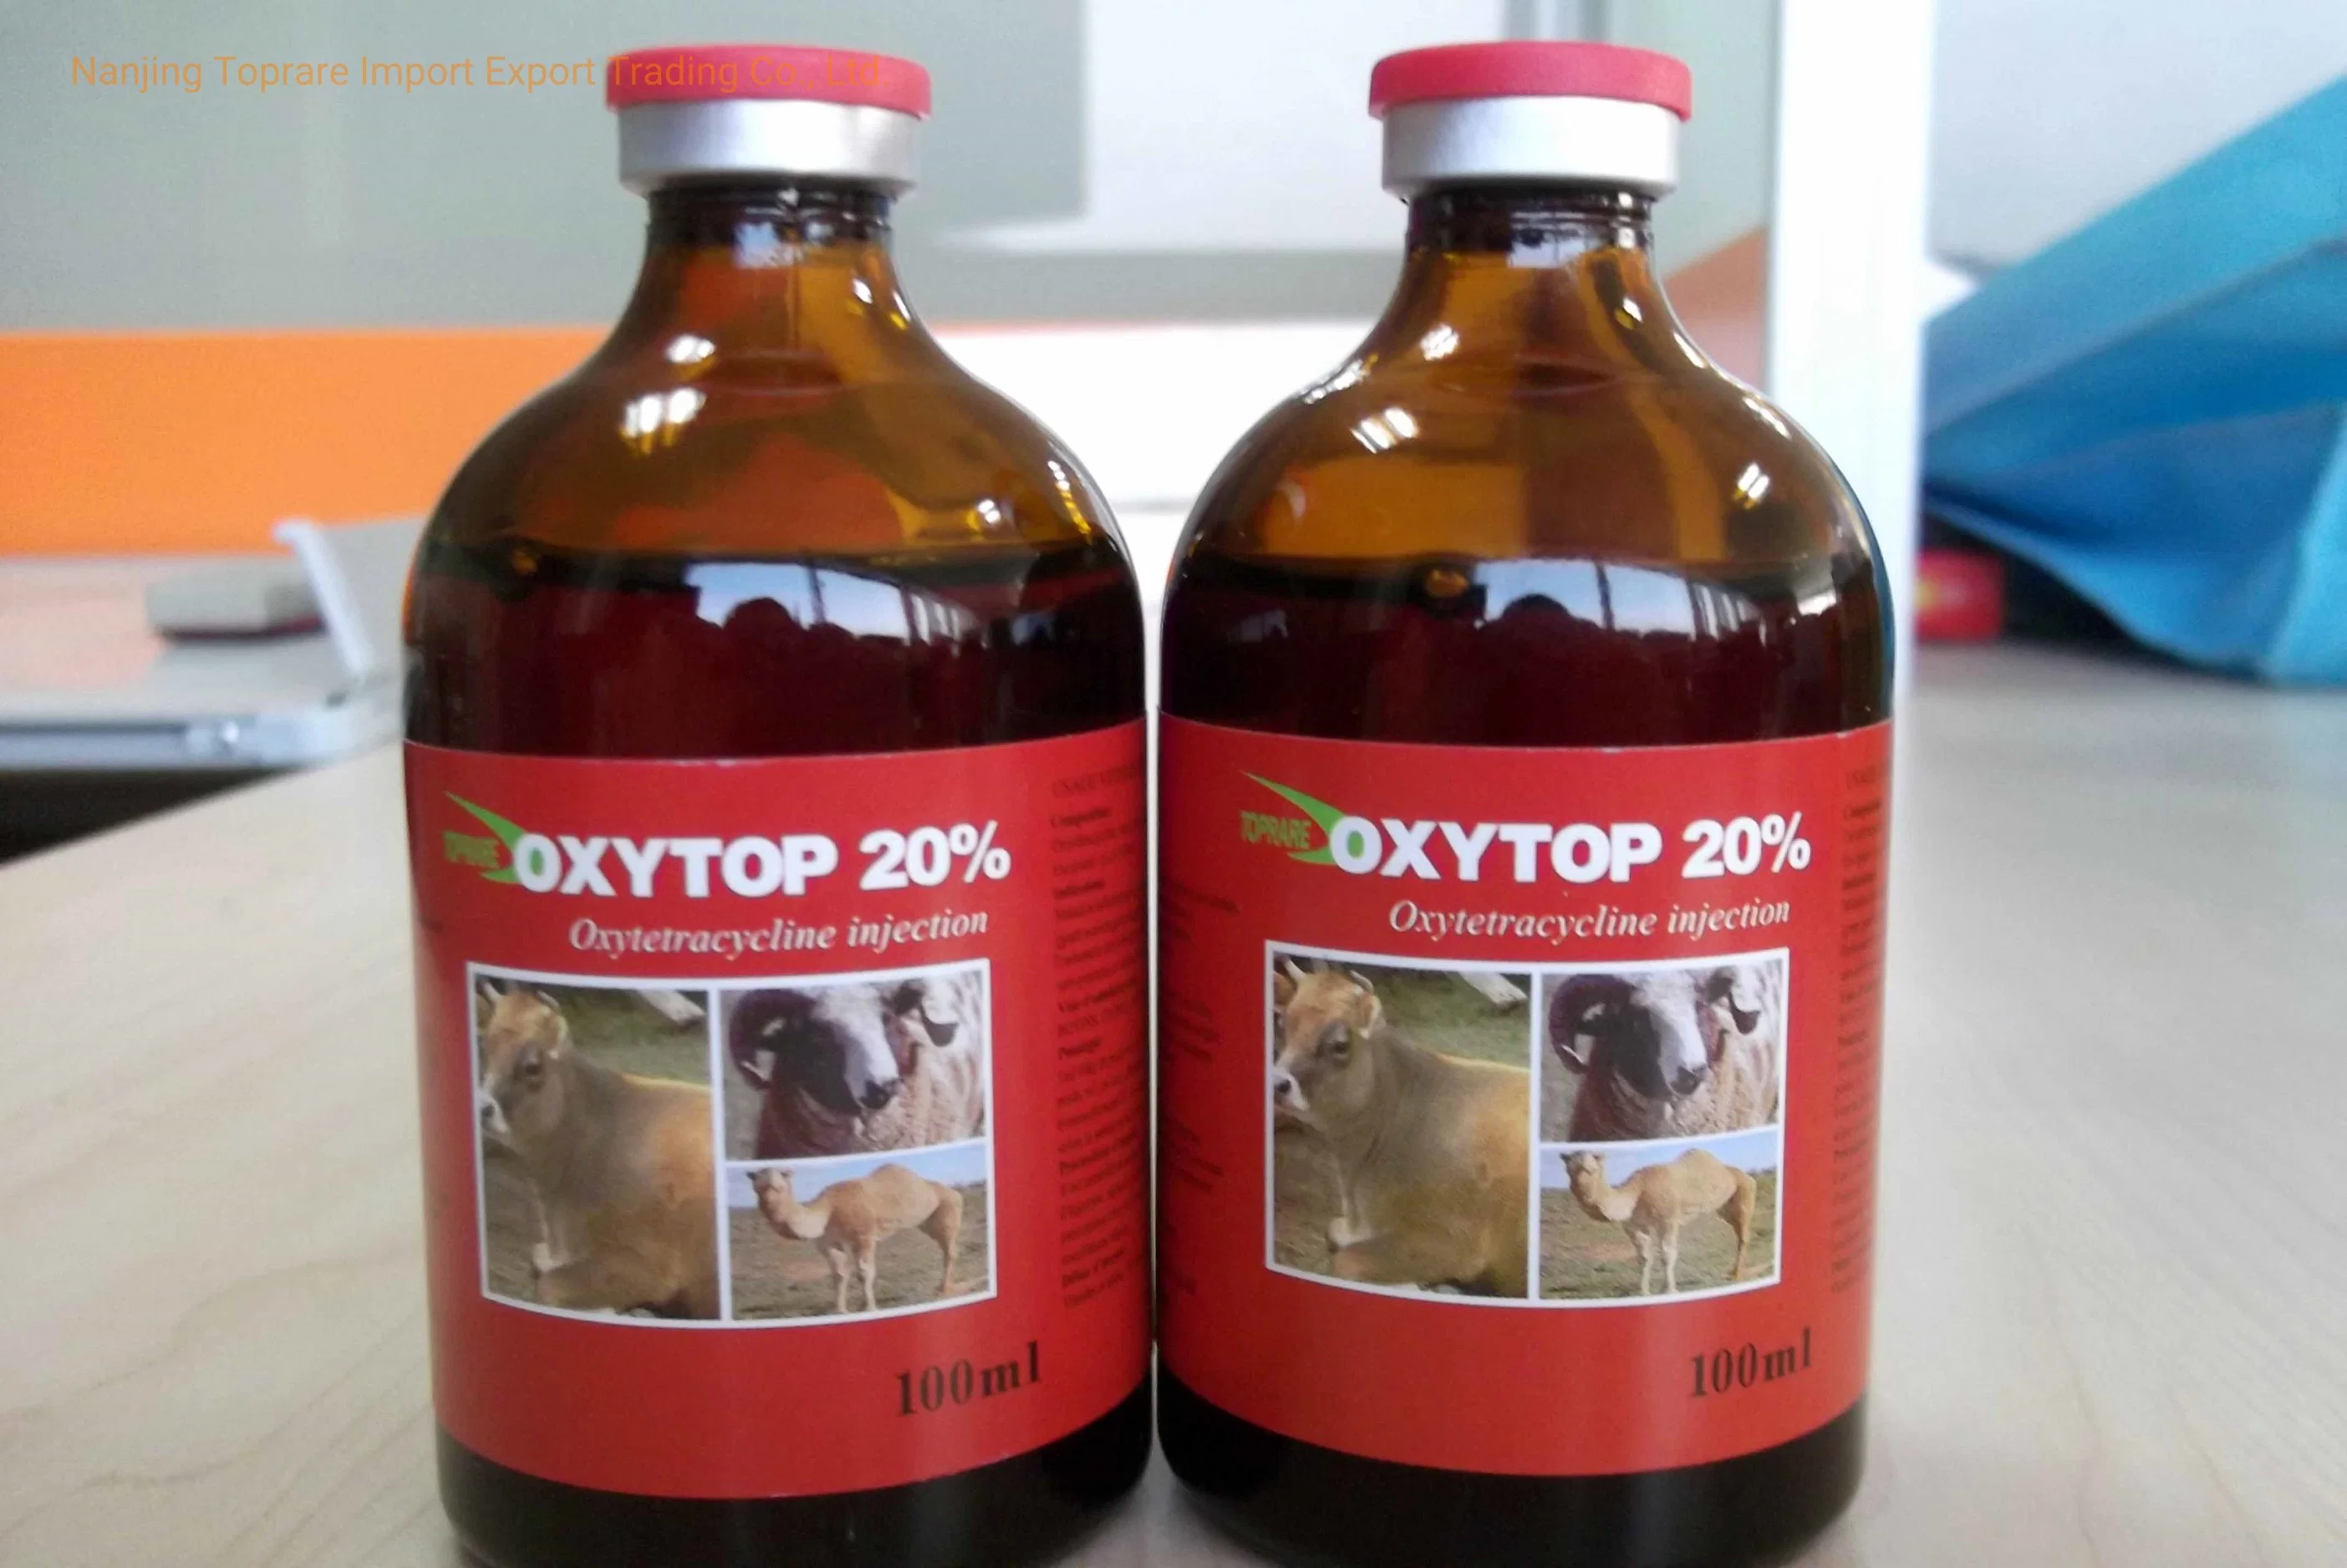 Veterinary Drugs of 10% Oxytetracycline Injection (50ml/100ml) of ivermectin injection of Clorsulon injection